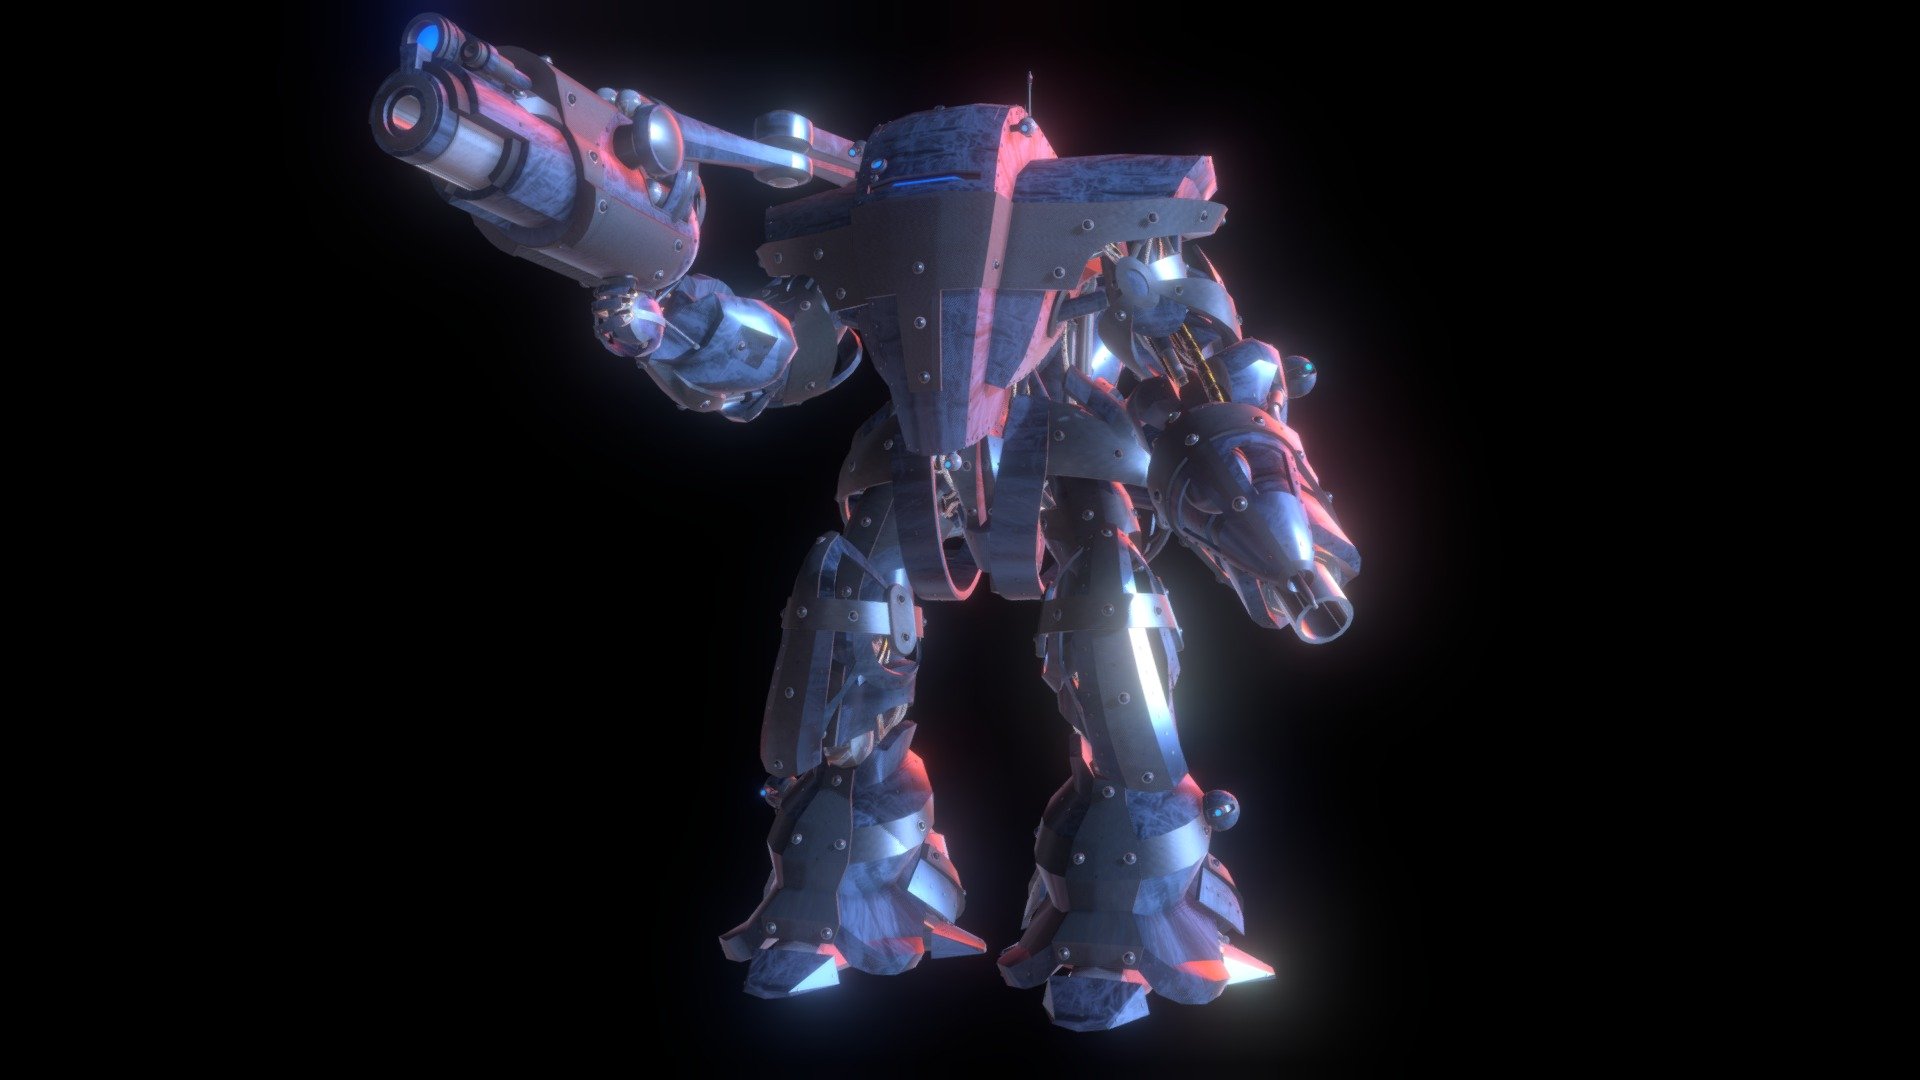 A mech I modeled in 2013 for fun.  I set up a simple IK rig for this walk cycle 3d model